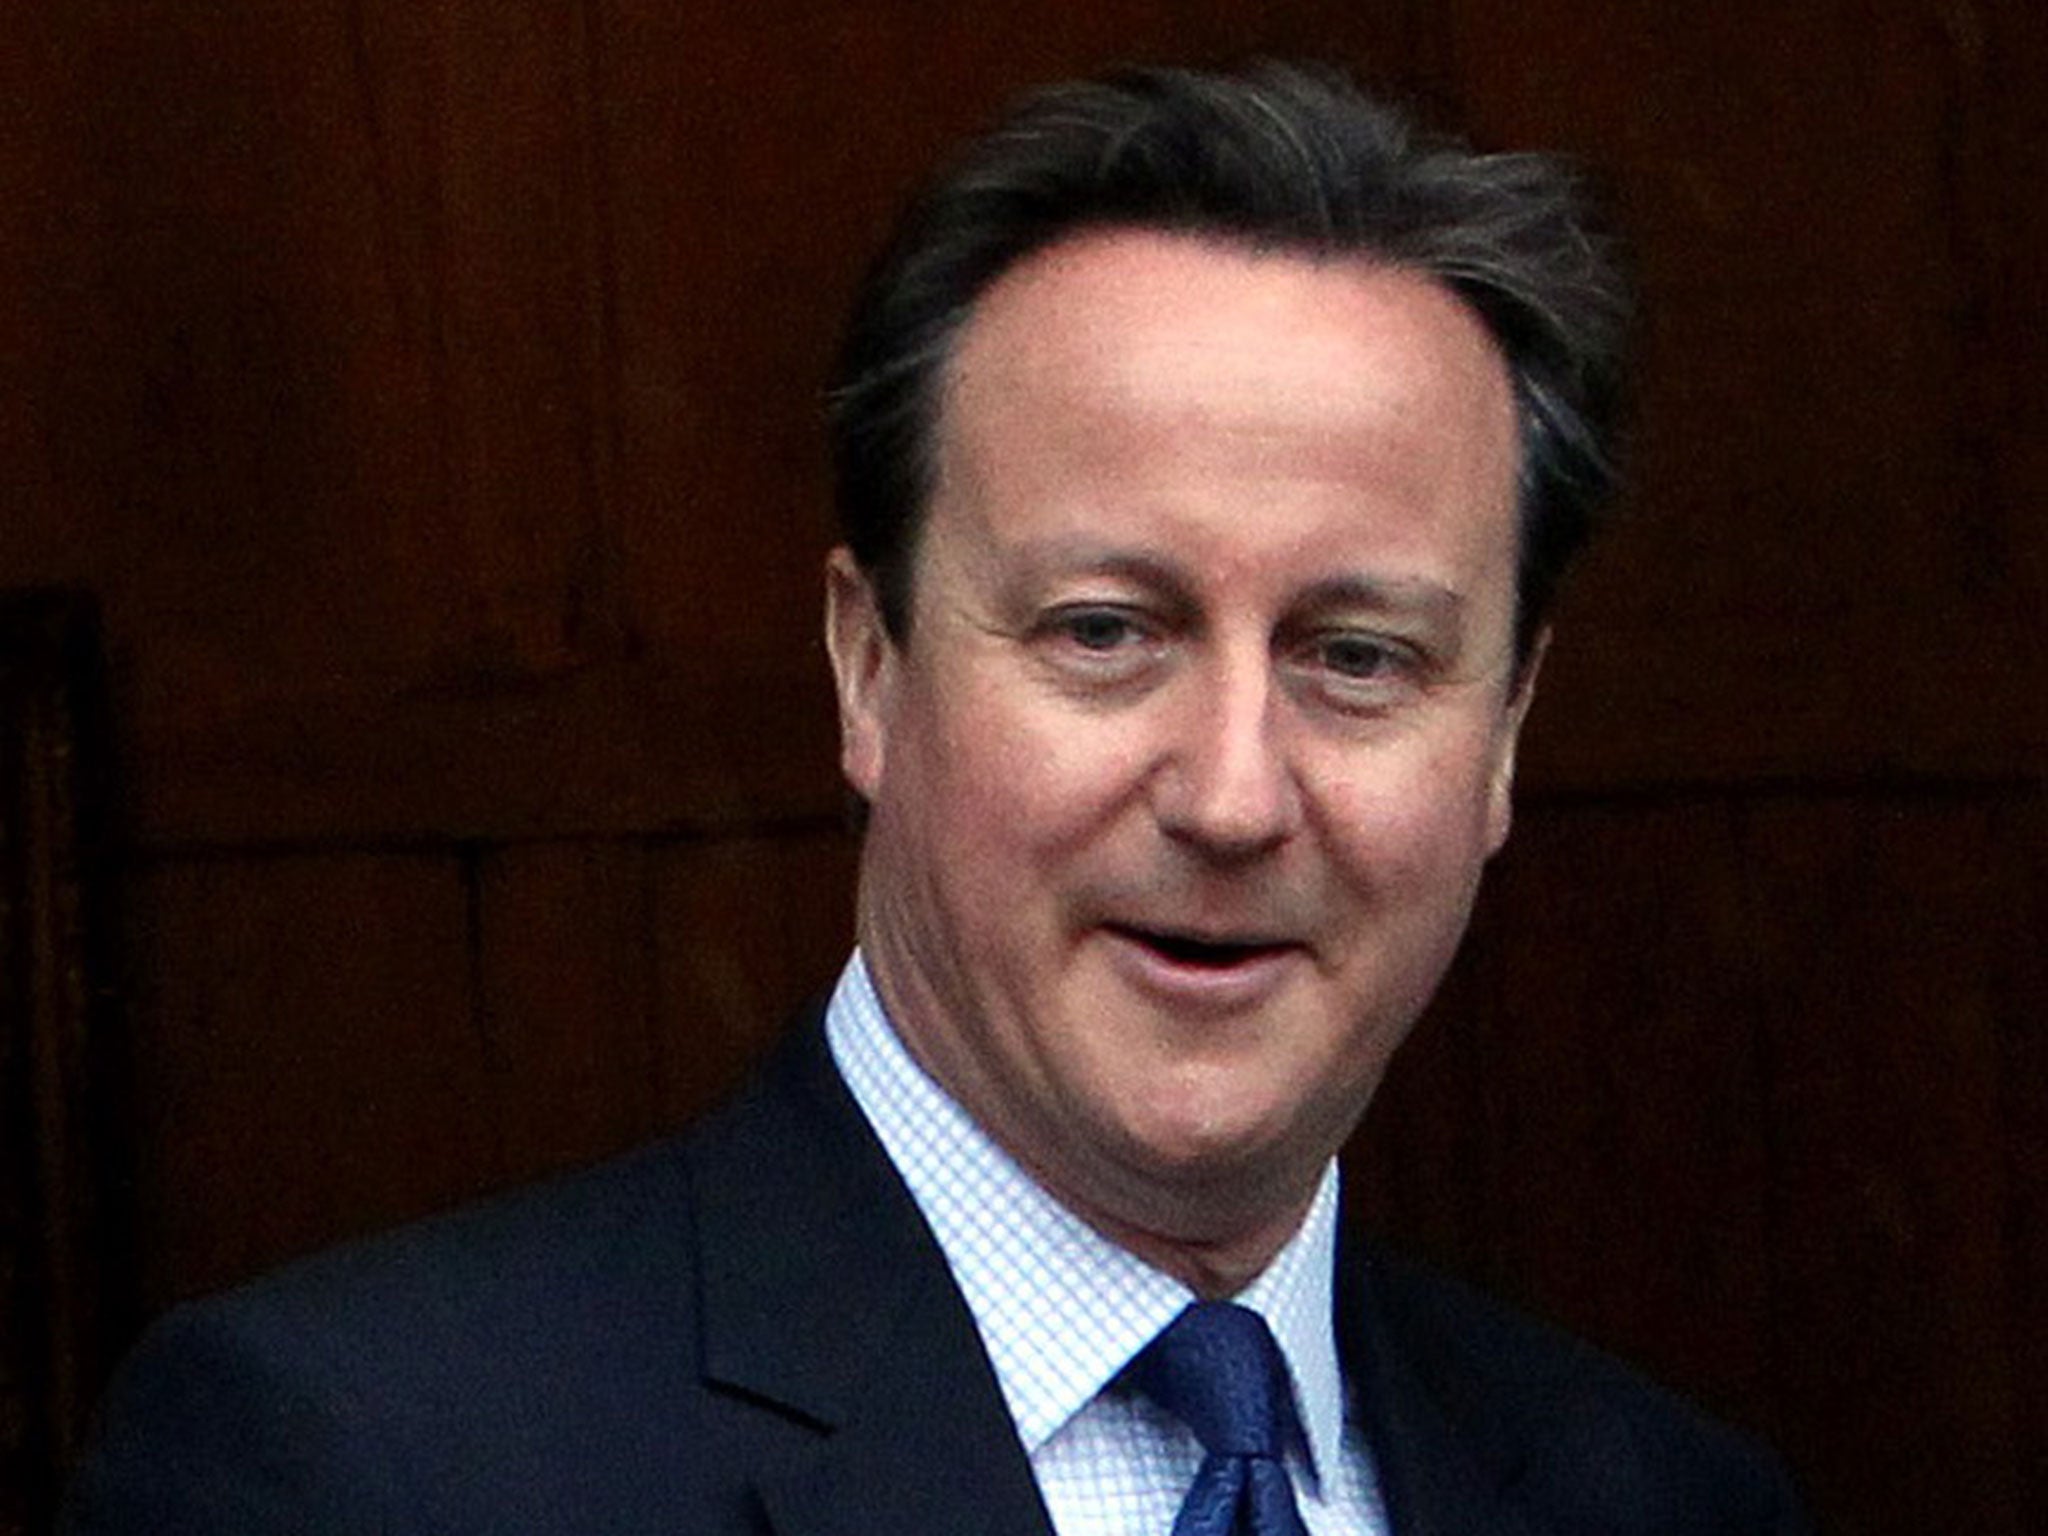 David Cameron is keen to avoid TV debates without being seen to sabotage the process